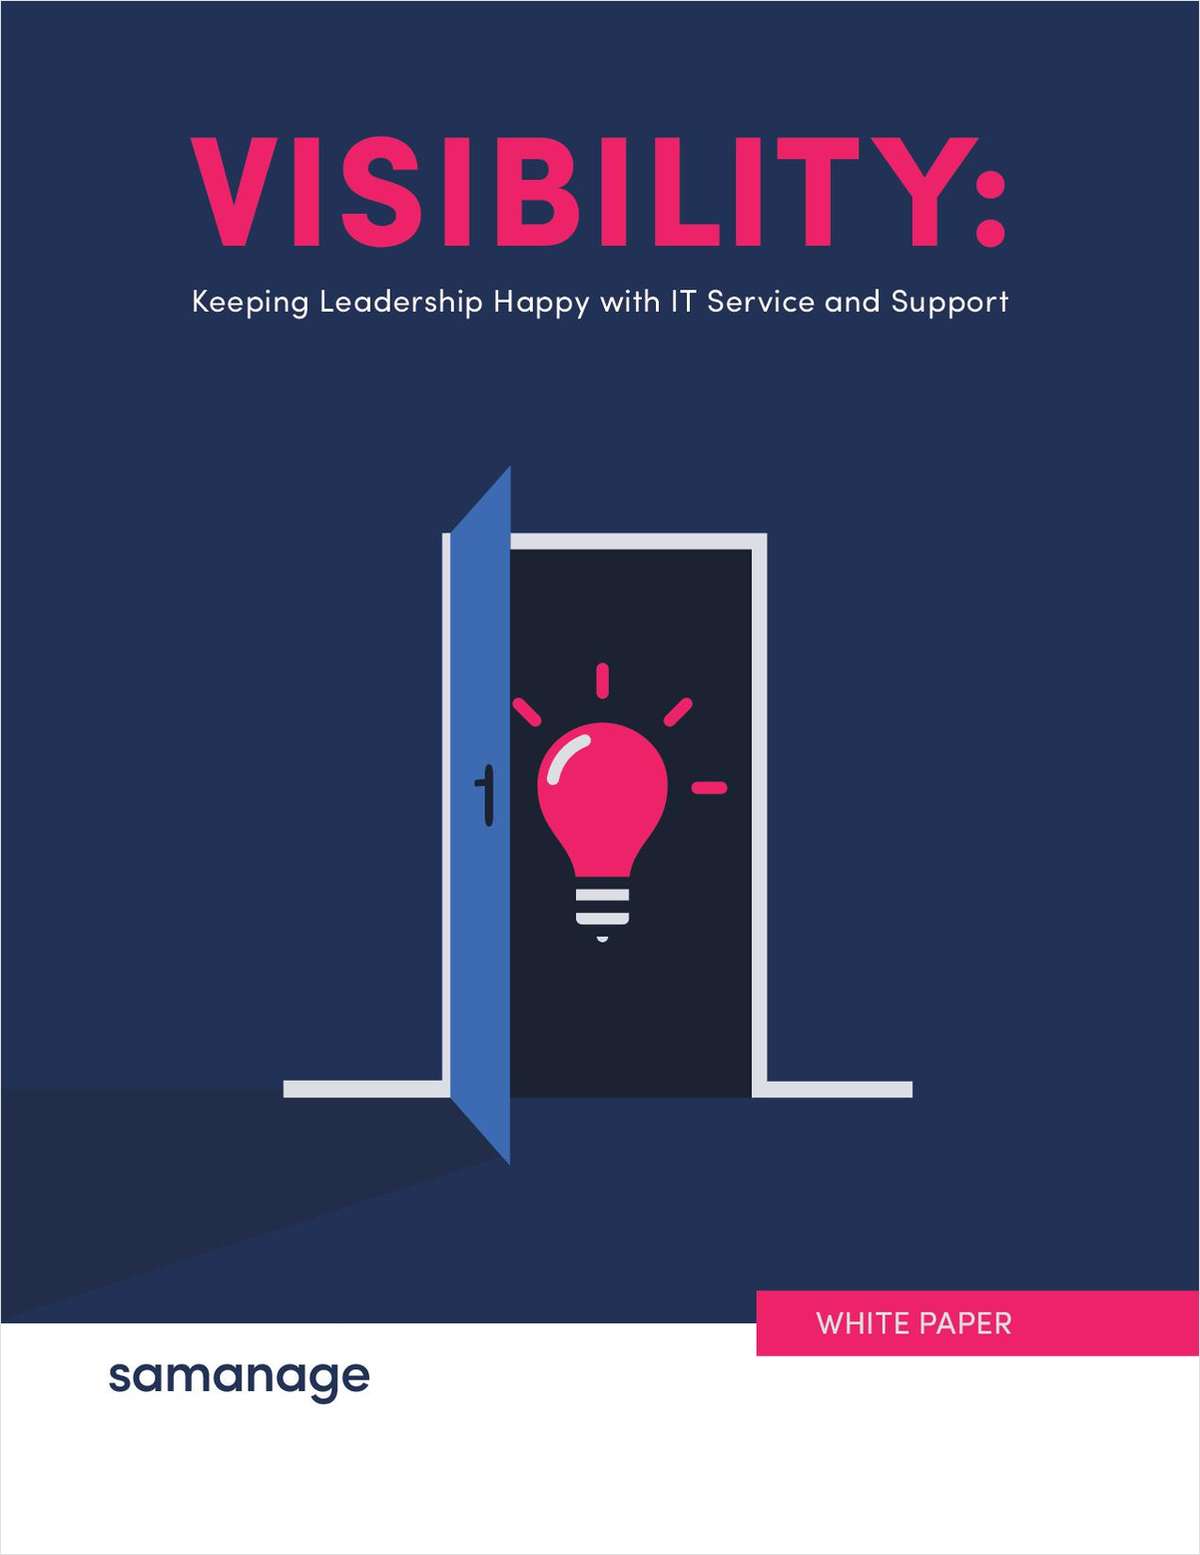 Visibility: Keeping Leadership Happy with IT Service and Support